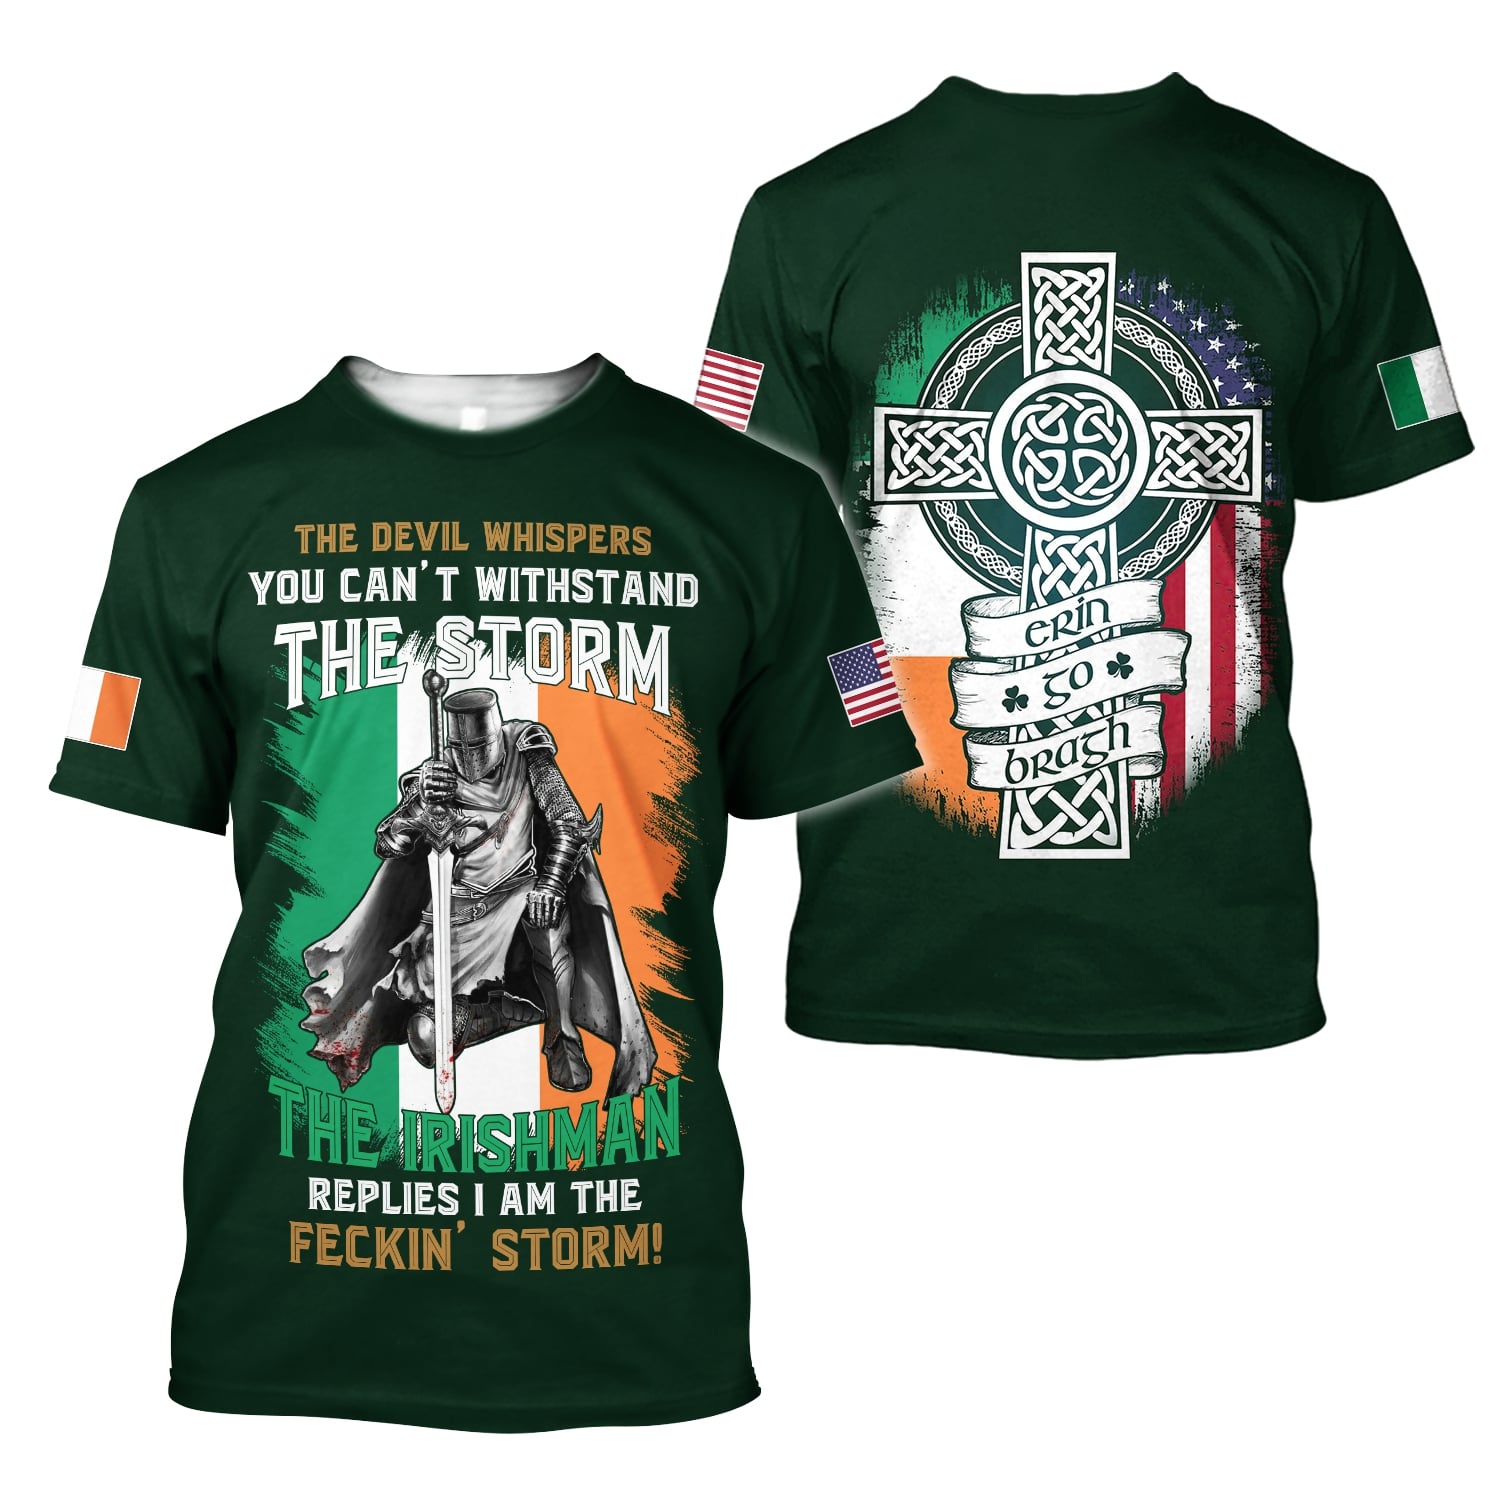 the devil whispers you can't withstand the storm the irishman replies i am the feckin storm tshirt